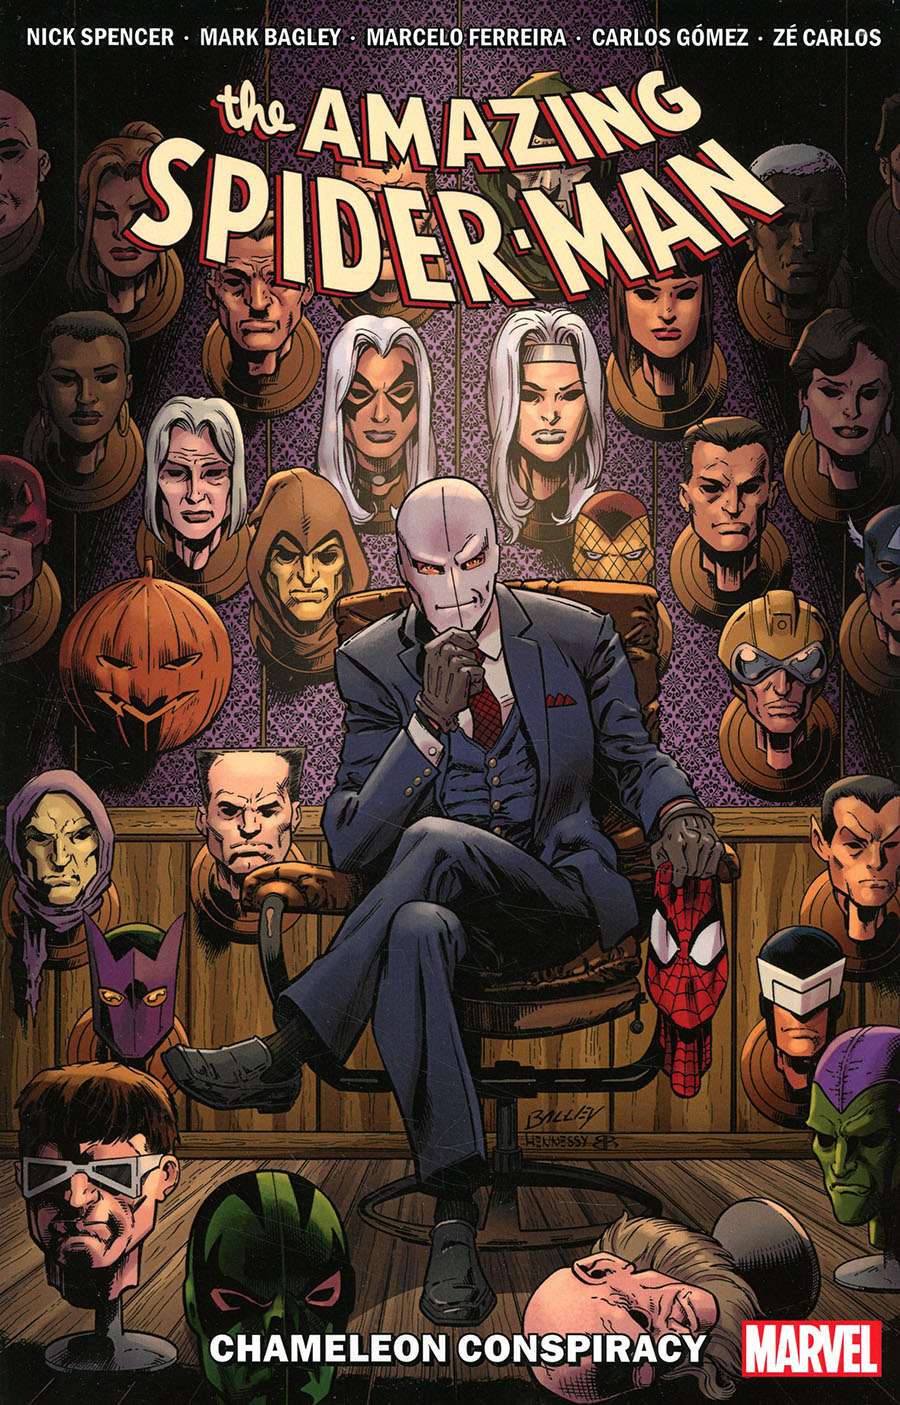 Amazing Spider-Man By Nick Spencer Vol 14 Chameleon Conspiracy TP